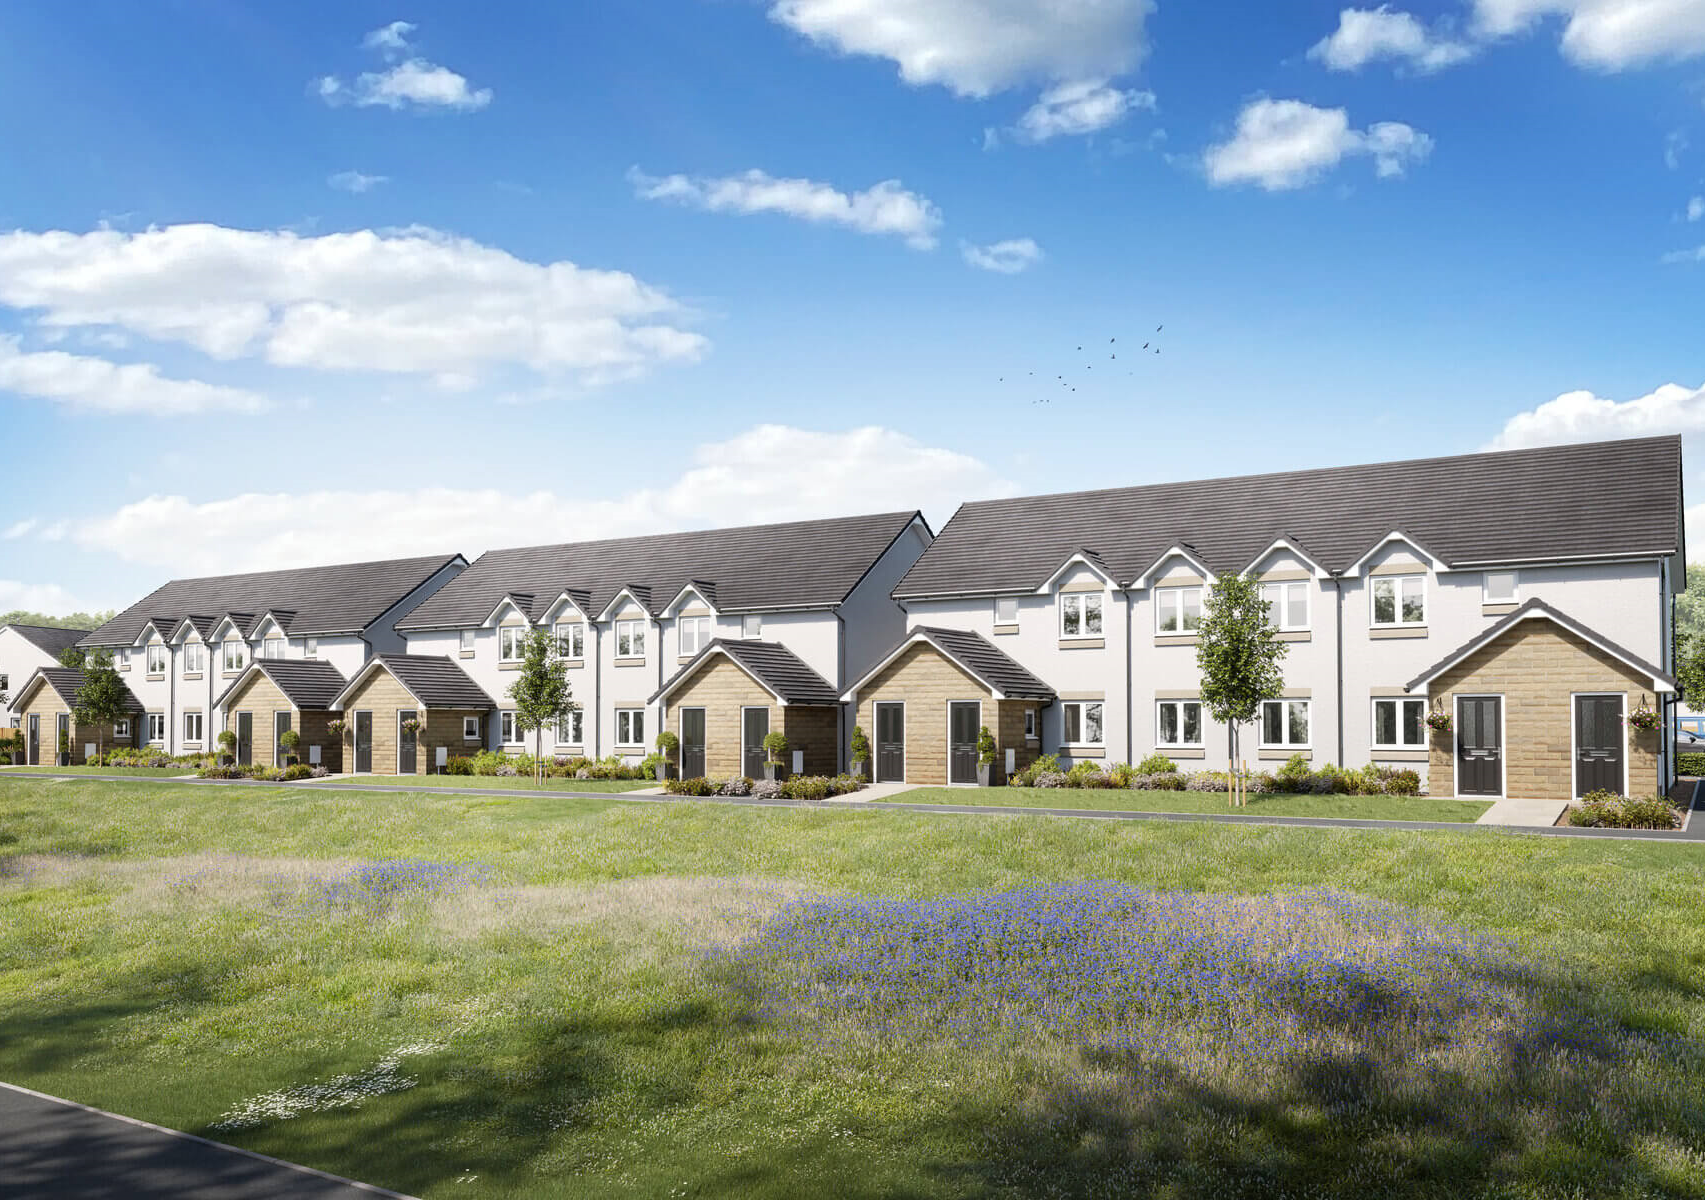 Taylor Wimpey secures deal to deliver 28 new affordable homes in Dunbar